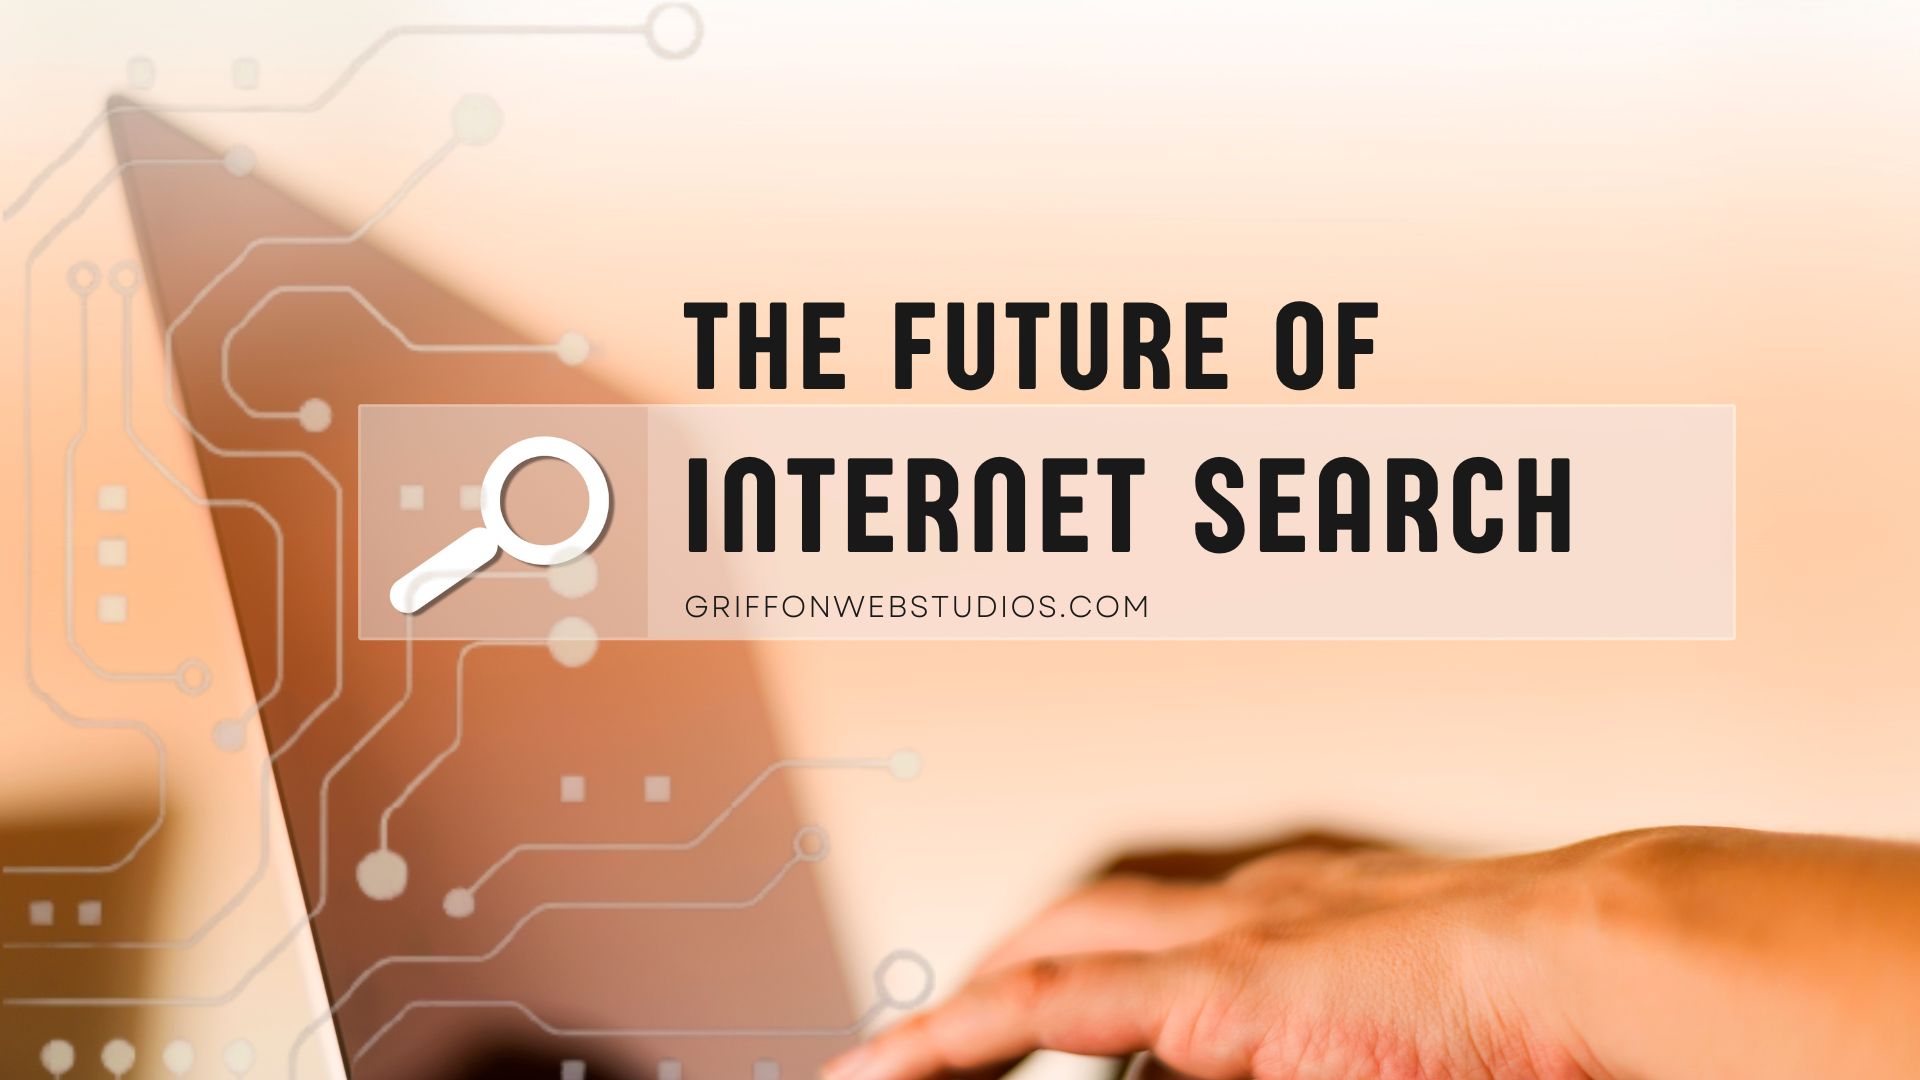 The Evolution of Internet Search and its Future